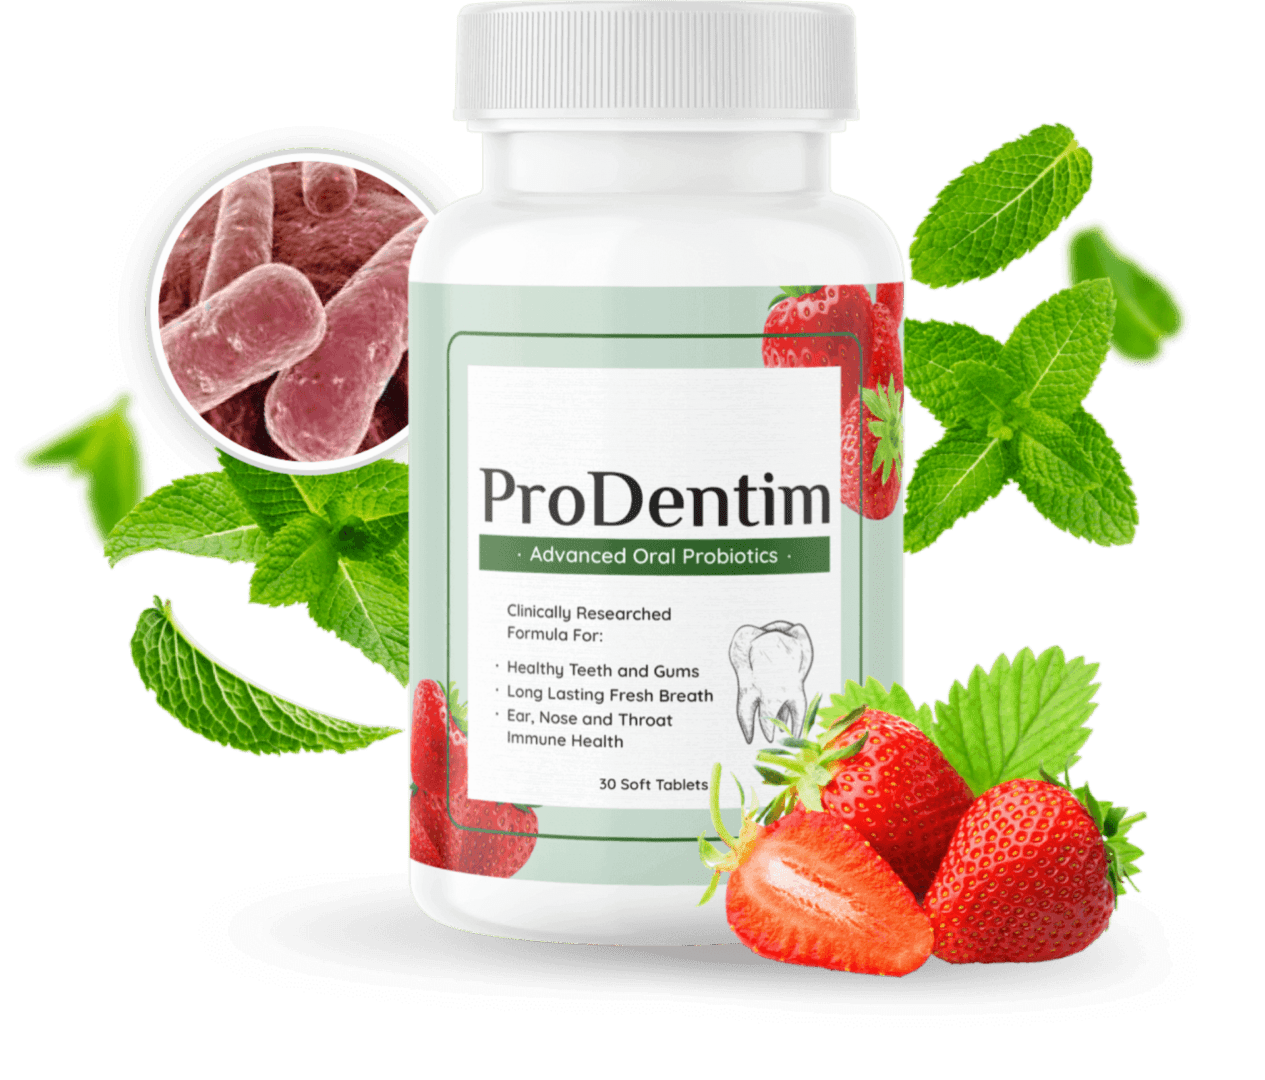 ProDentim - Simple Tips To Prevent Receding Gums & Improve Teeth Health